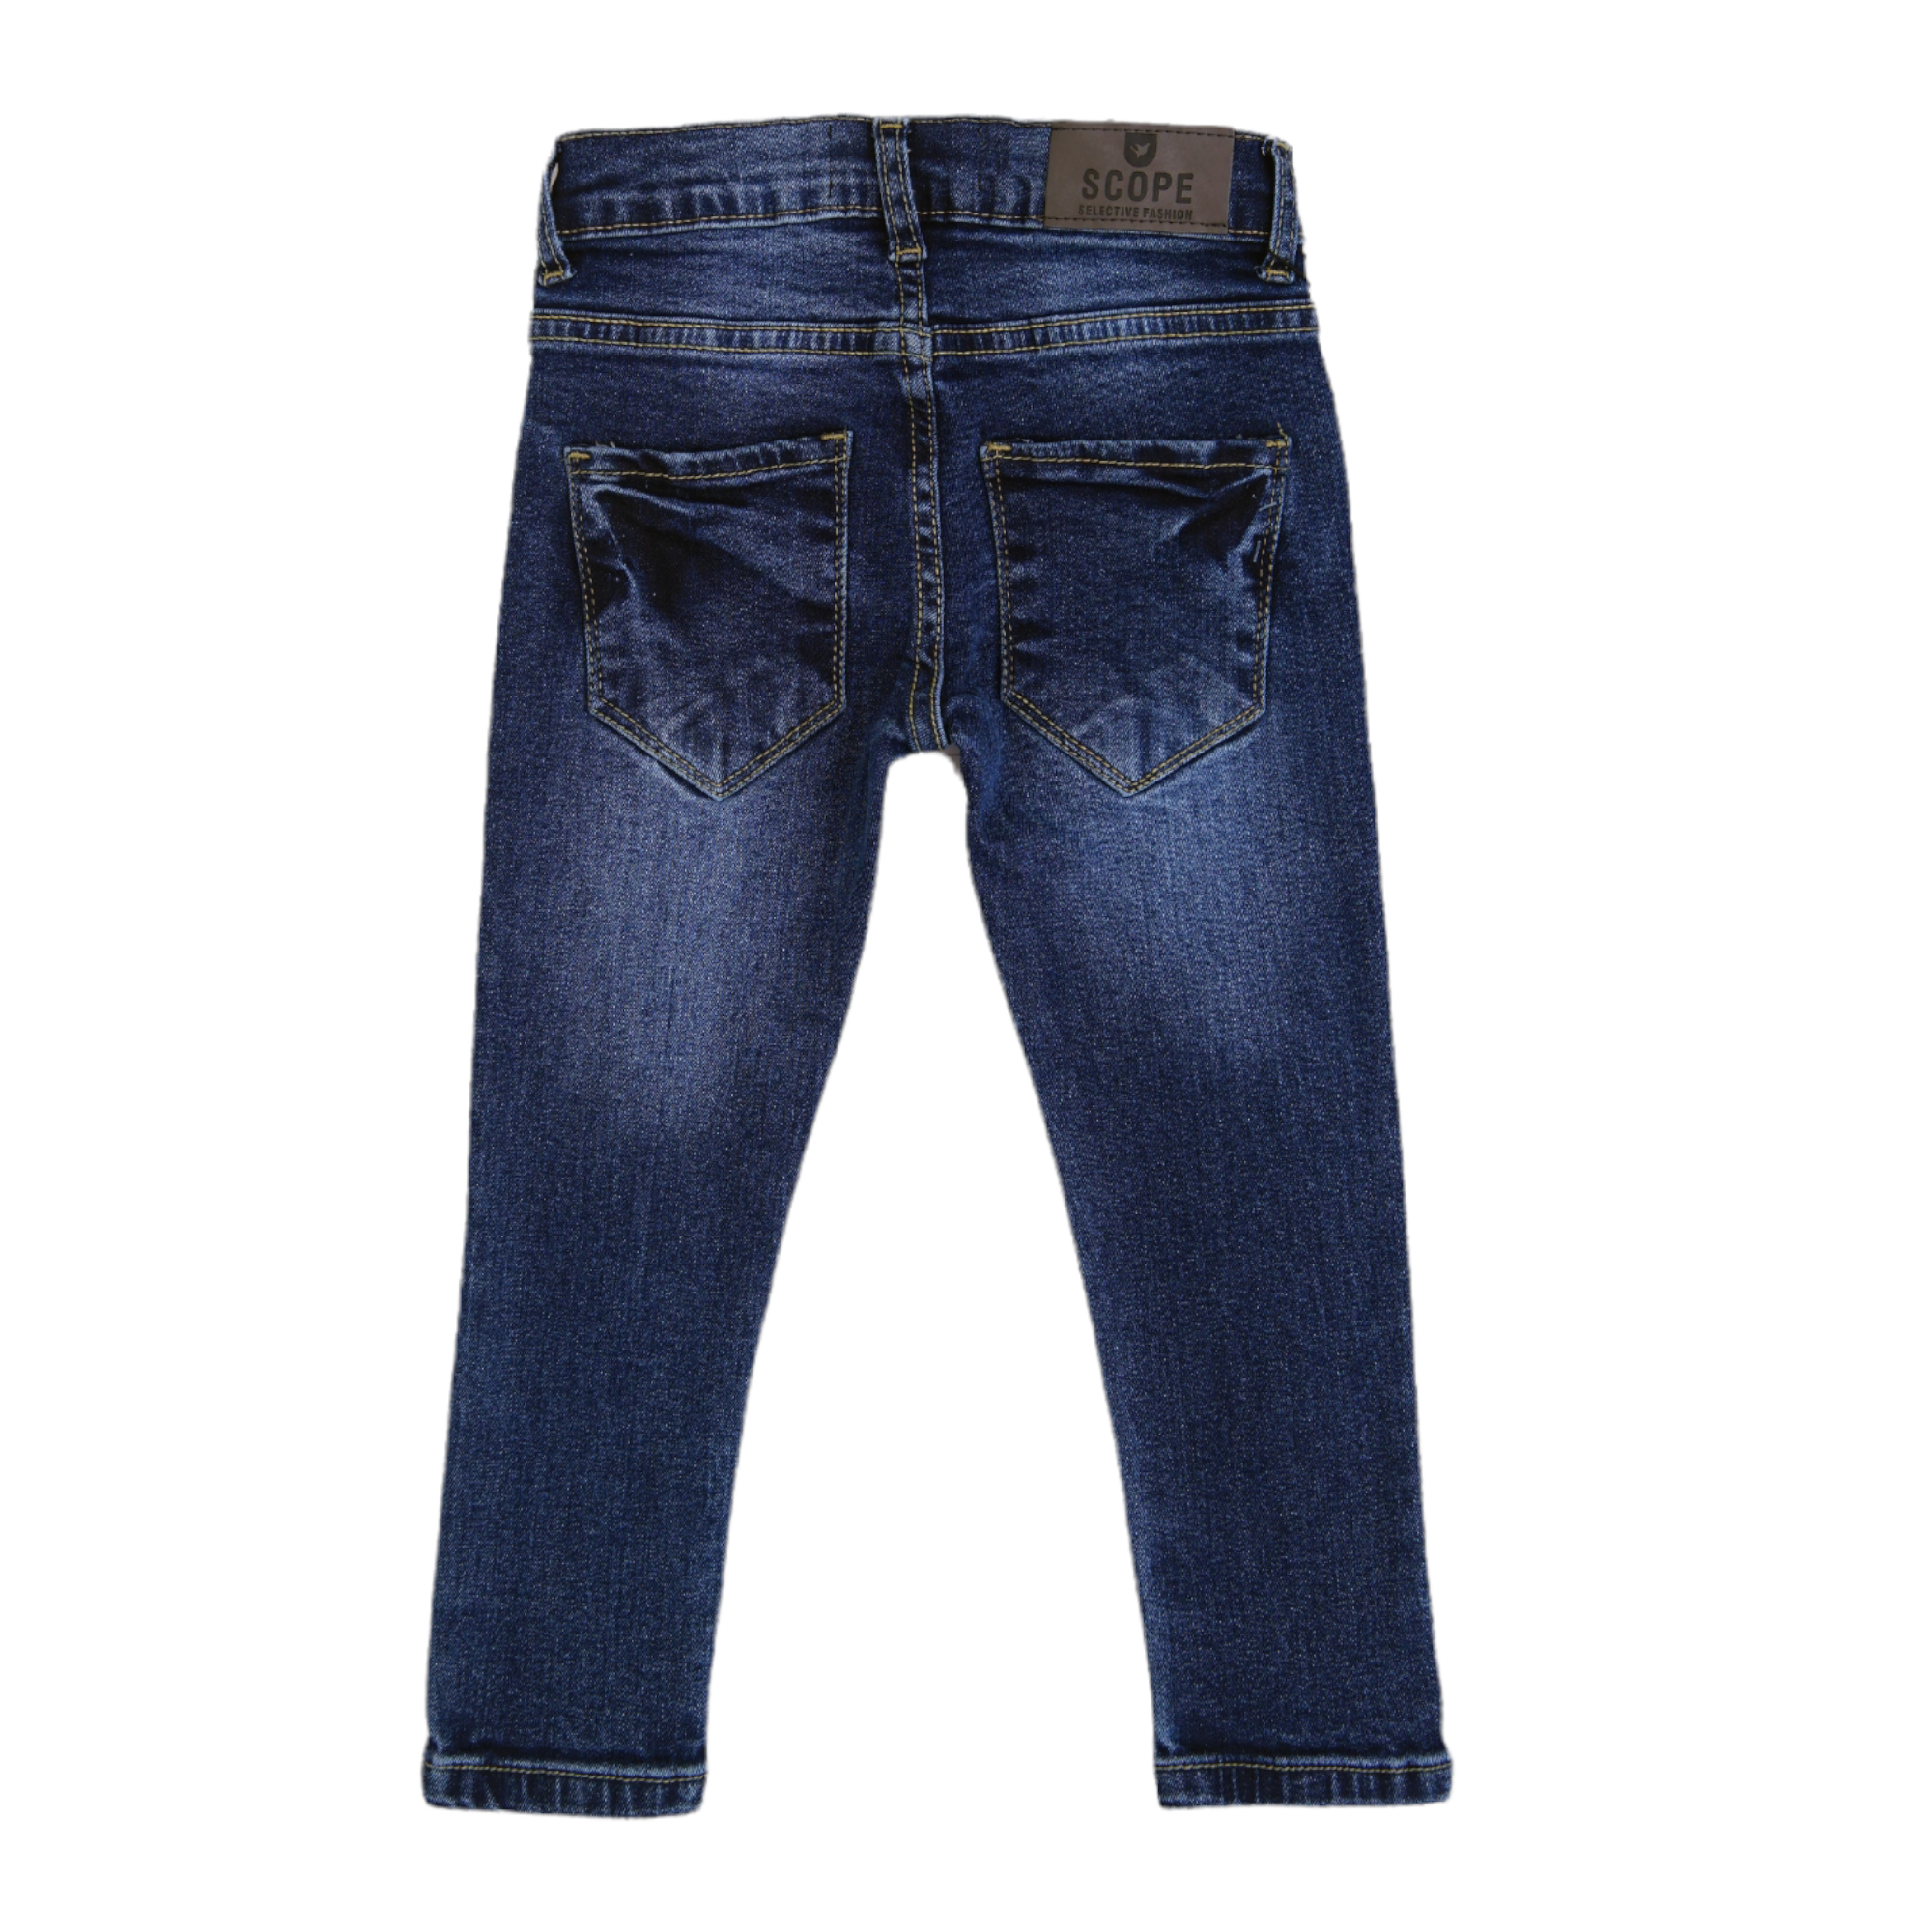 NAVY BLUE FADED JEANS PANT